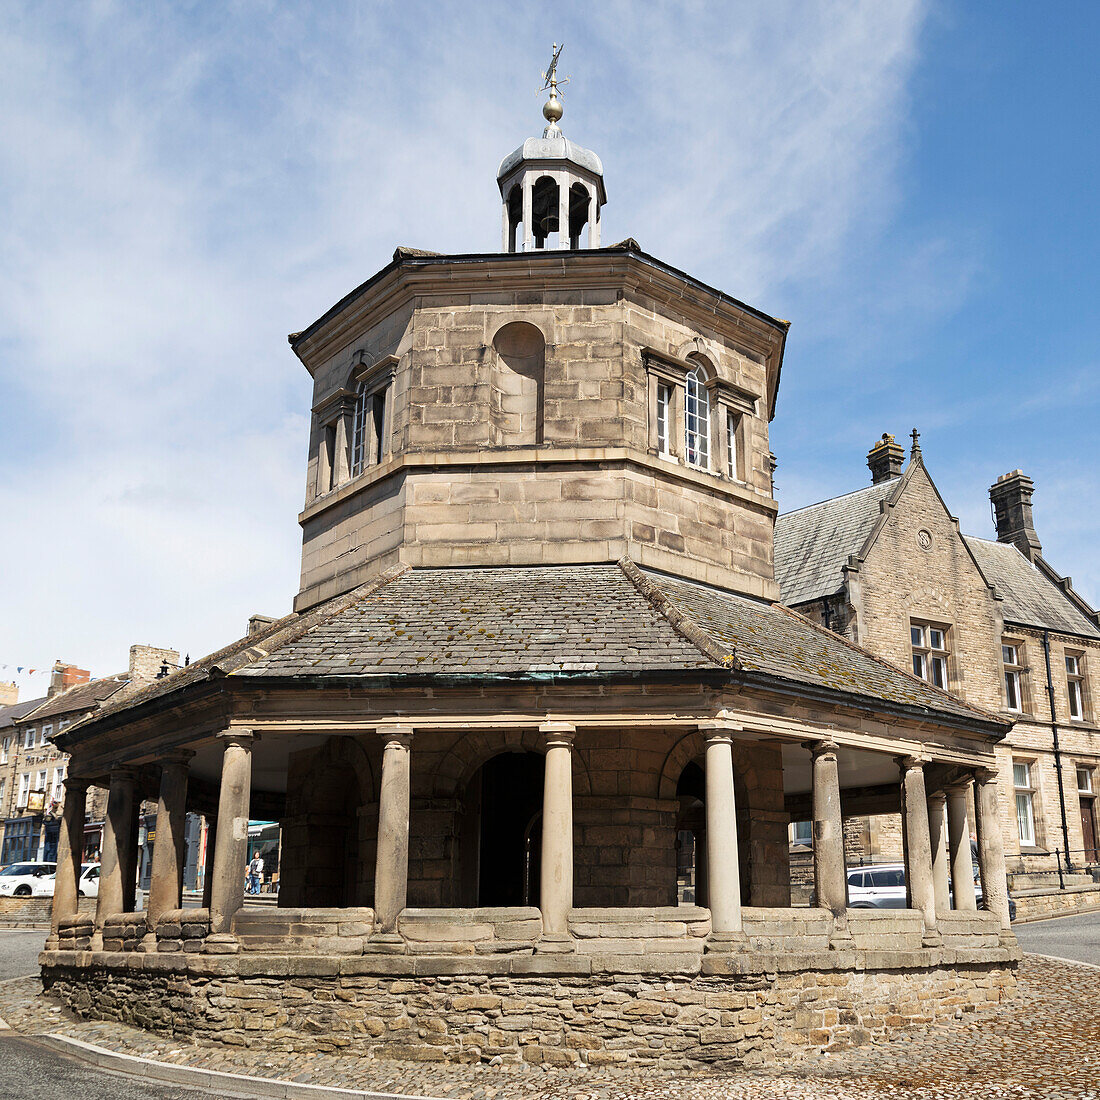 The octagonal Market Cross (Butter Market) (Break's Folley), a Grade I Listed Building built by Thomas Breaks, dating from 1747, Barnard Castle, County Durham, England, United Kingdom, Europe\n